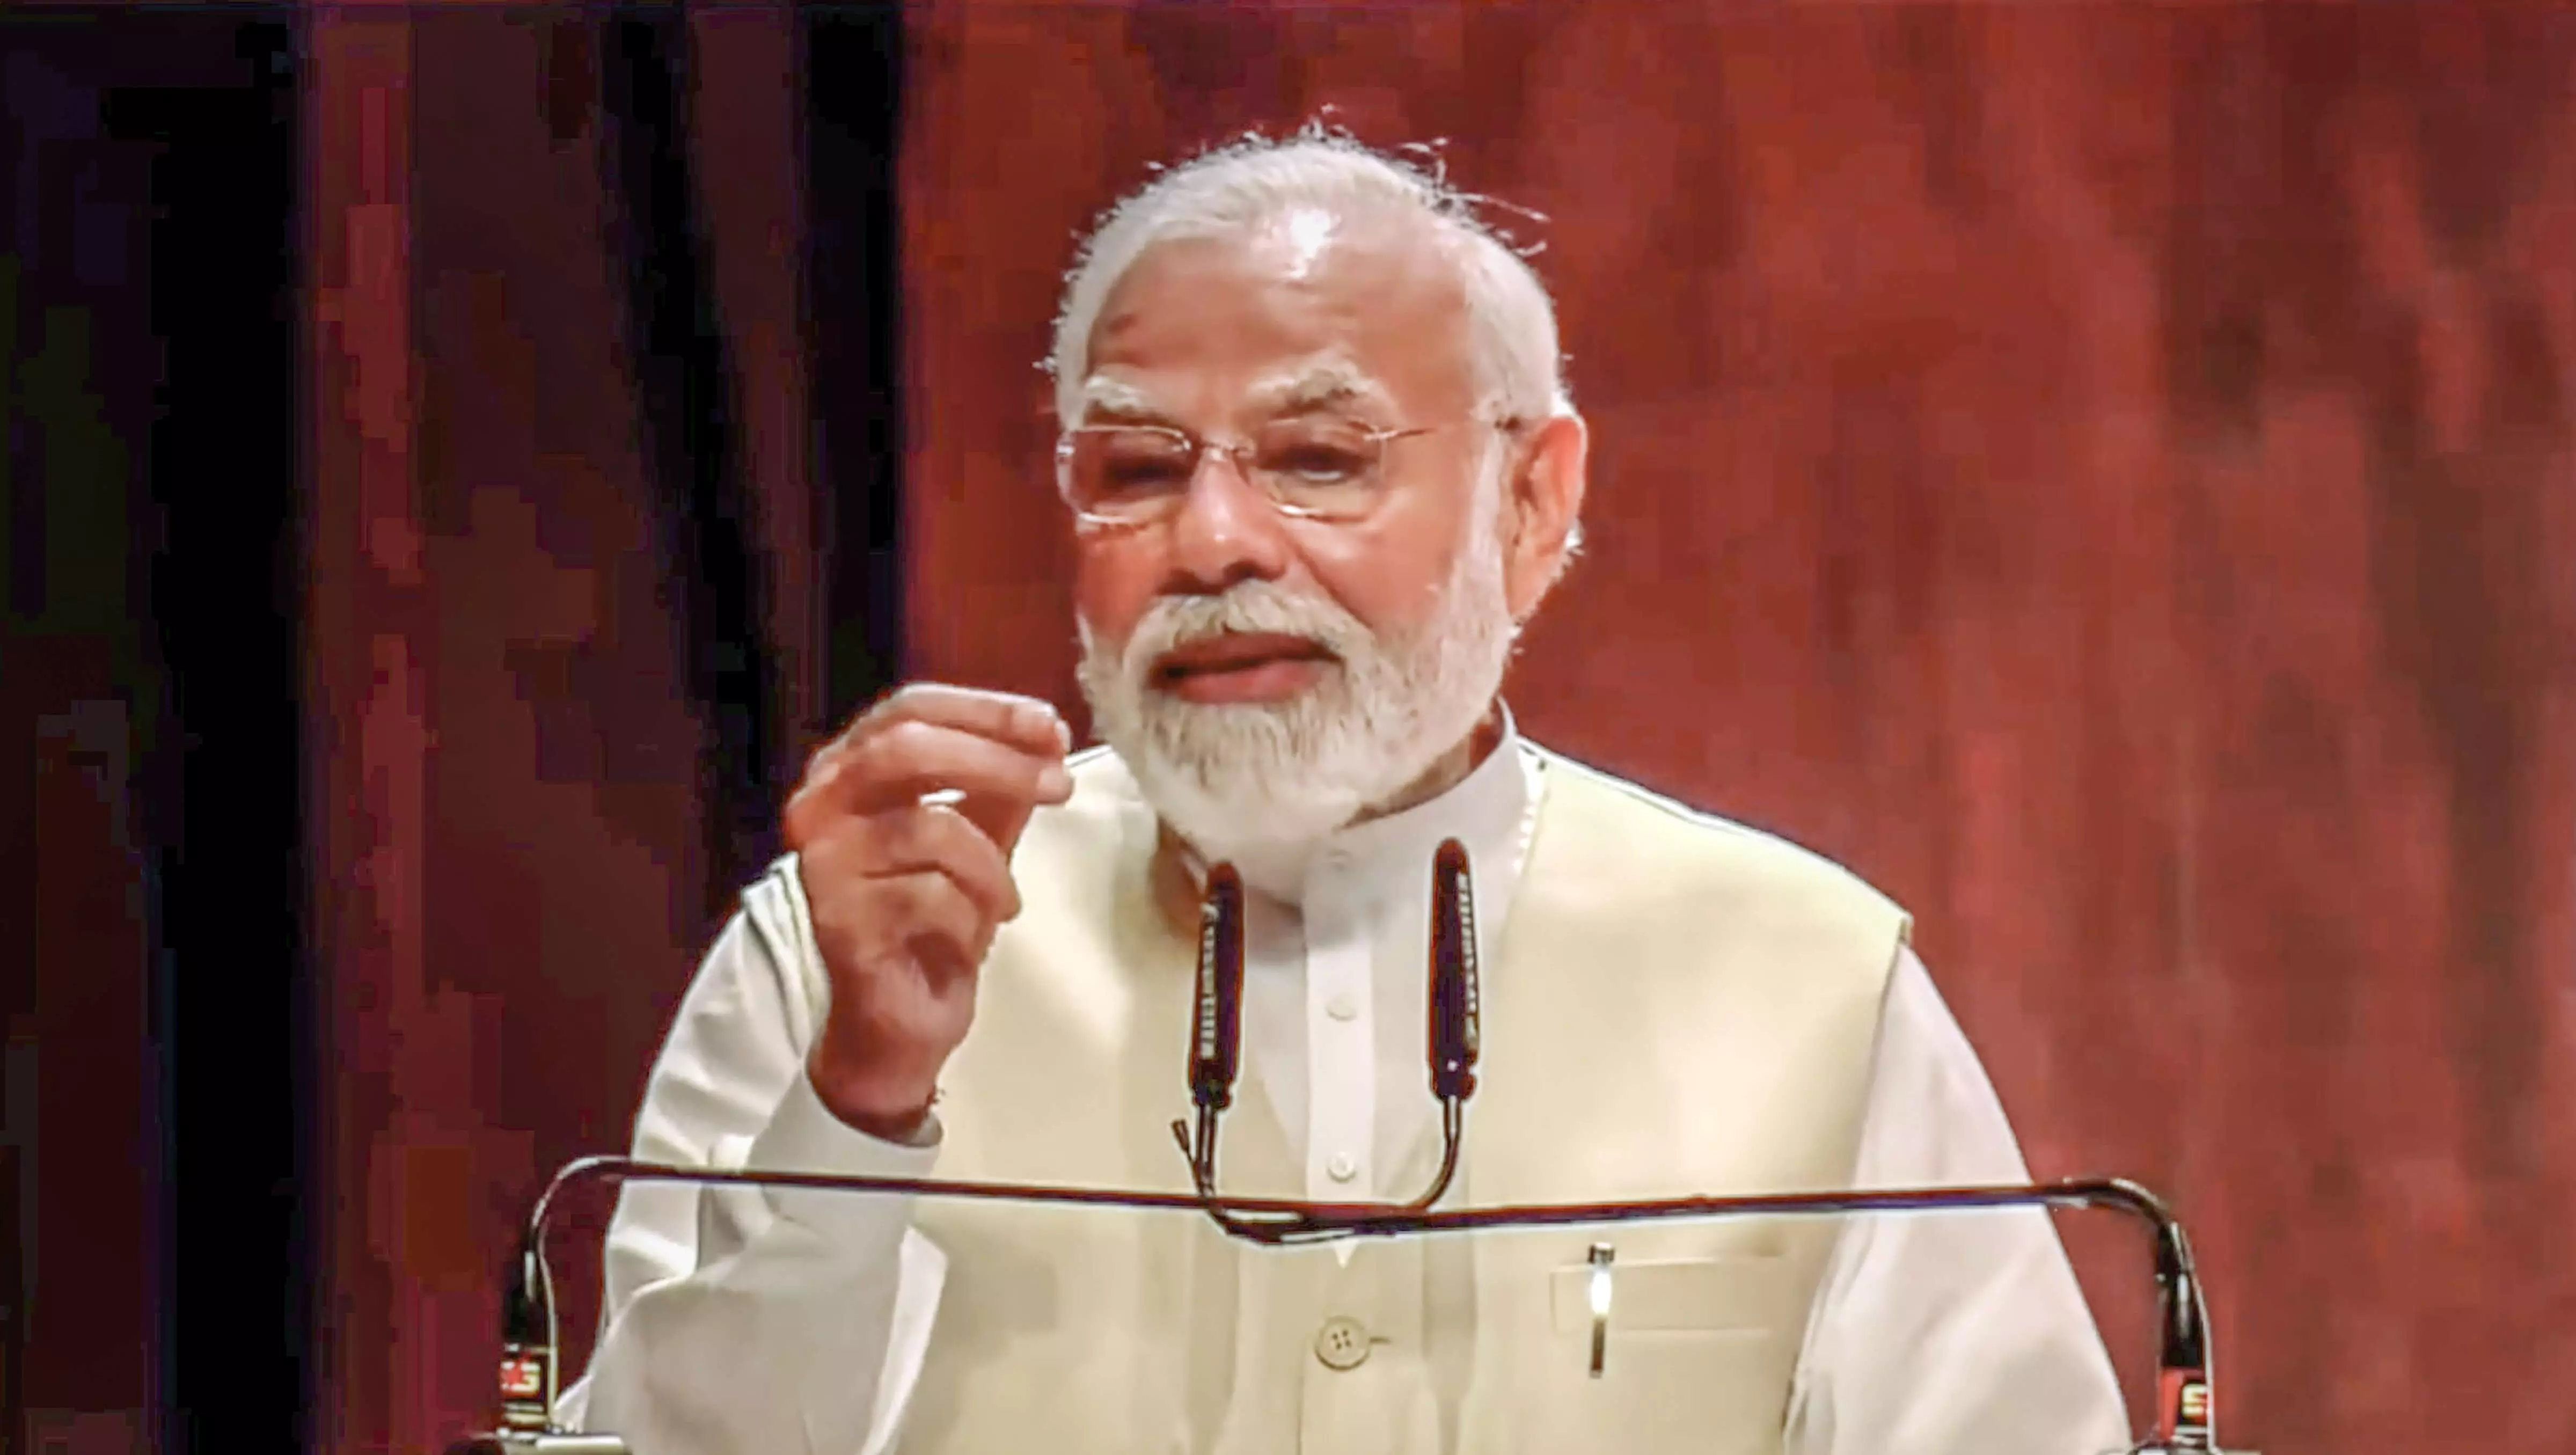 Savarkars fearless, self-respecting nature couldnt tolerate mindset of slavery: PM Modi